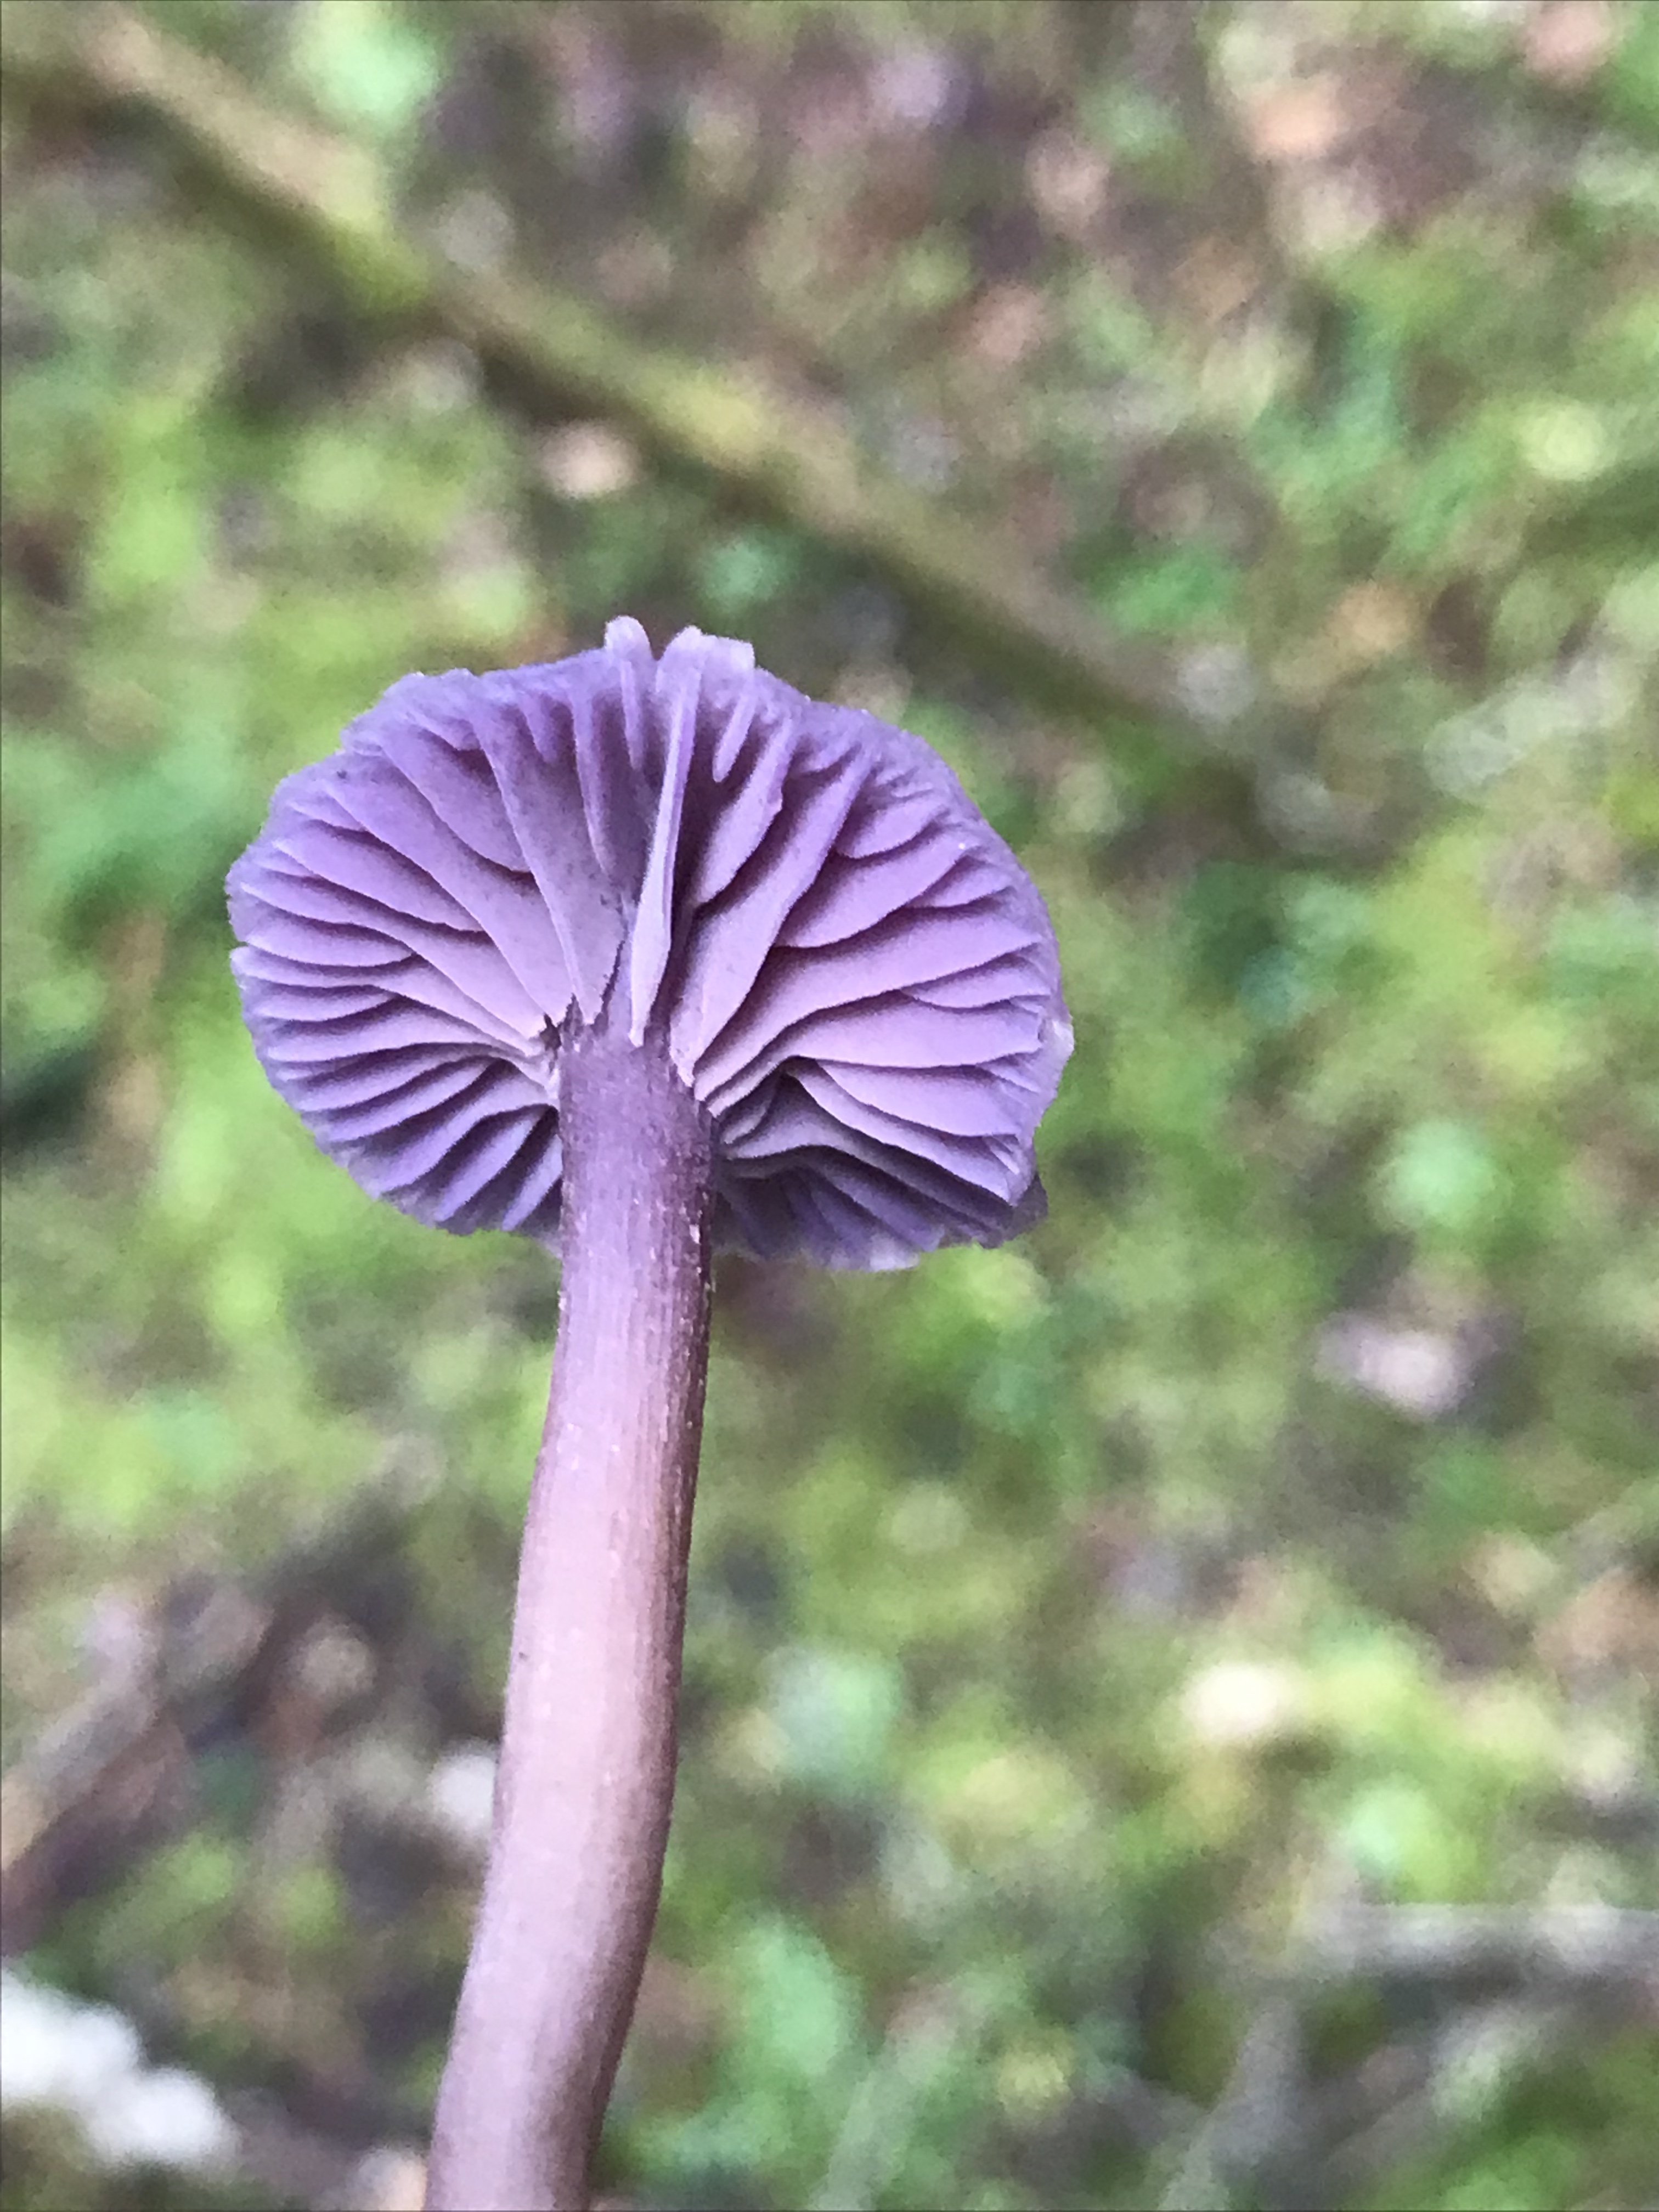 Image Description: A photograph showing the underside of a bright purple amethyst deceiver mushroom in front of a blurry green ground.